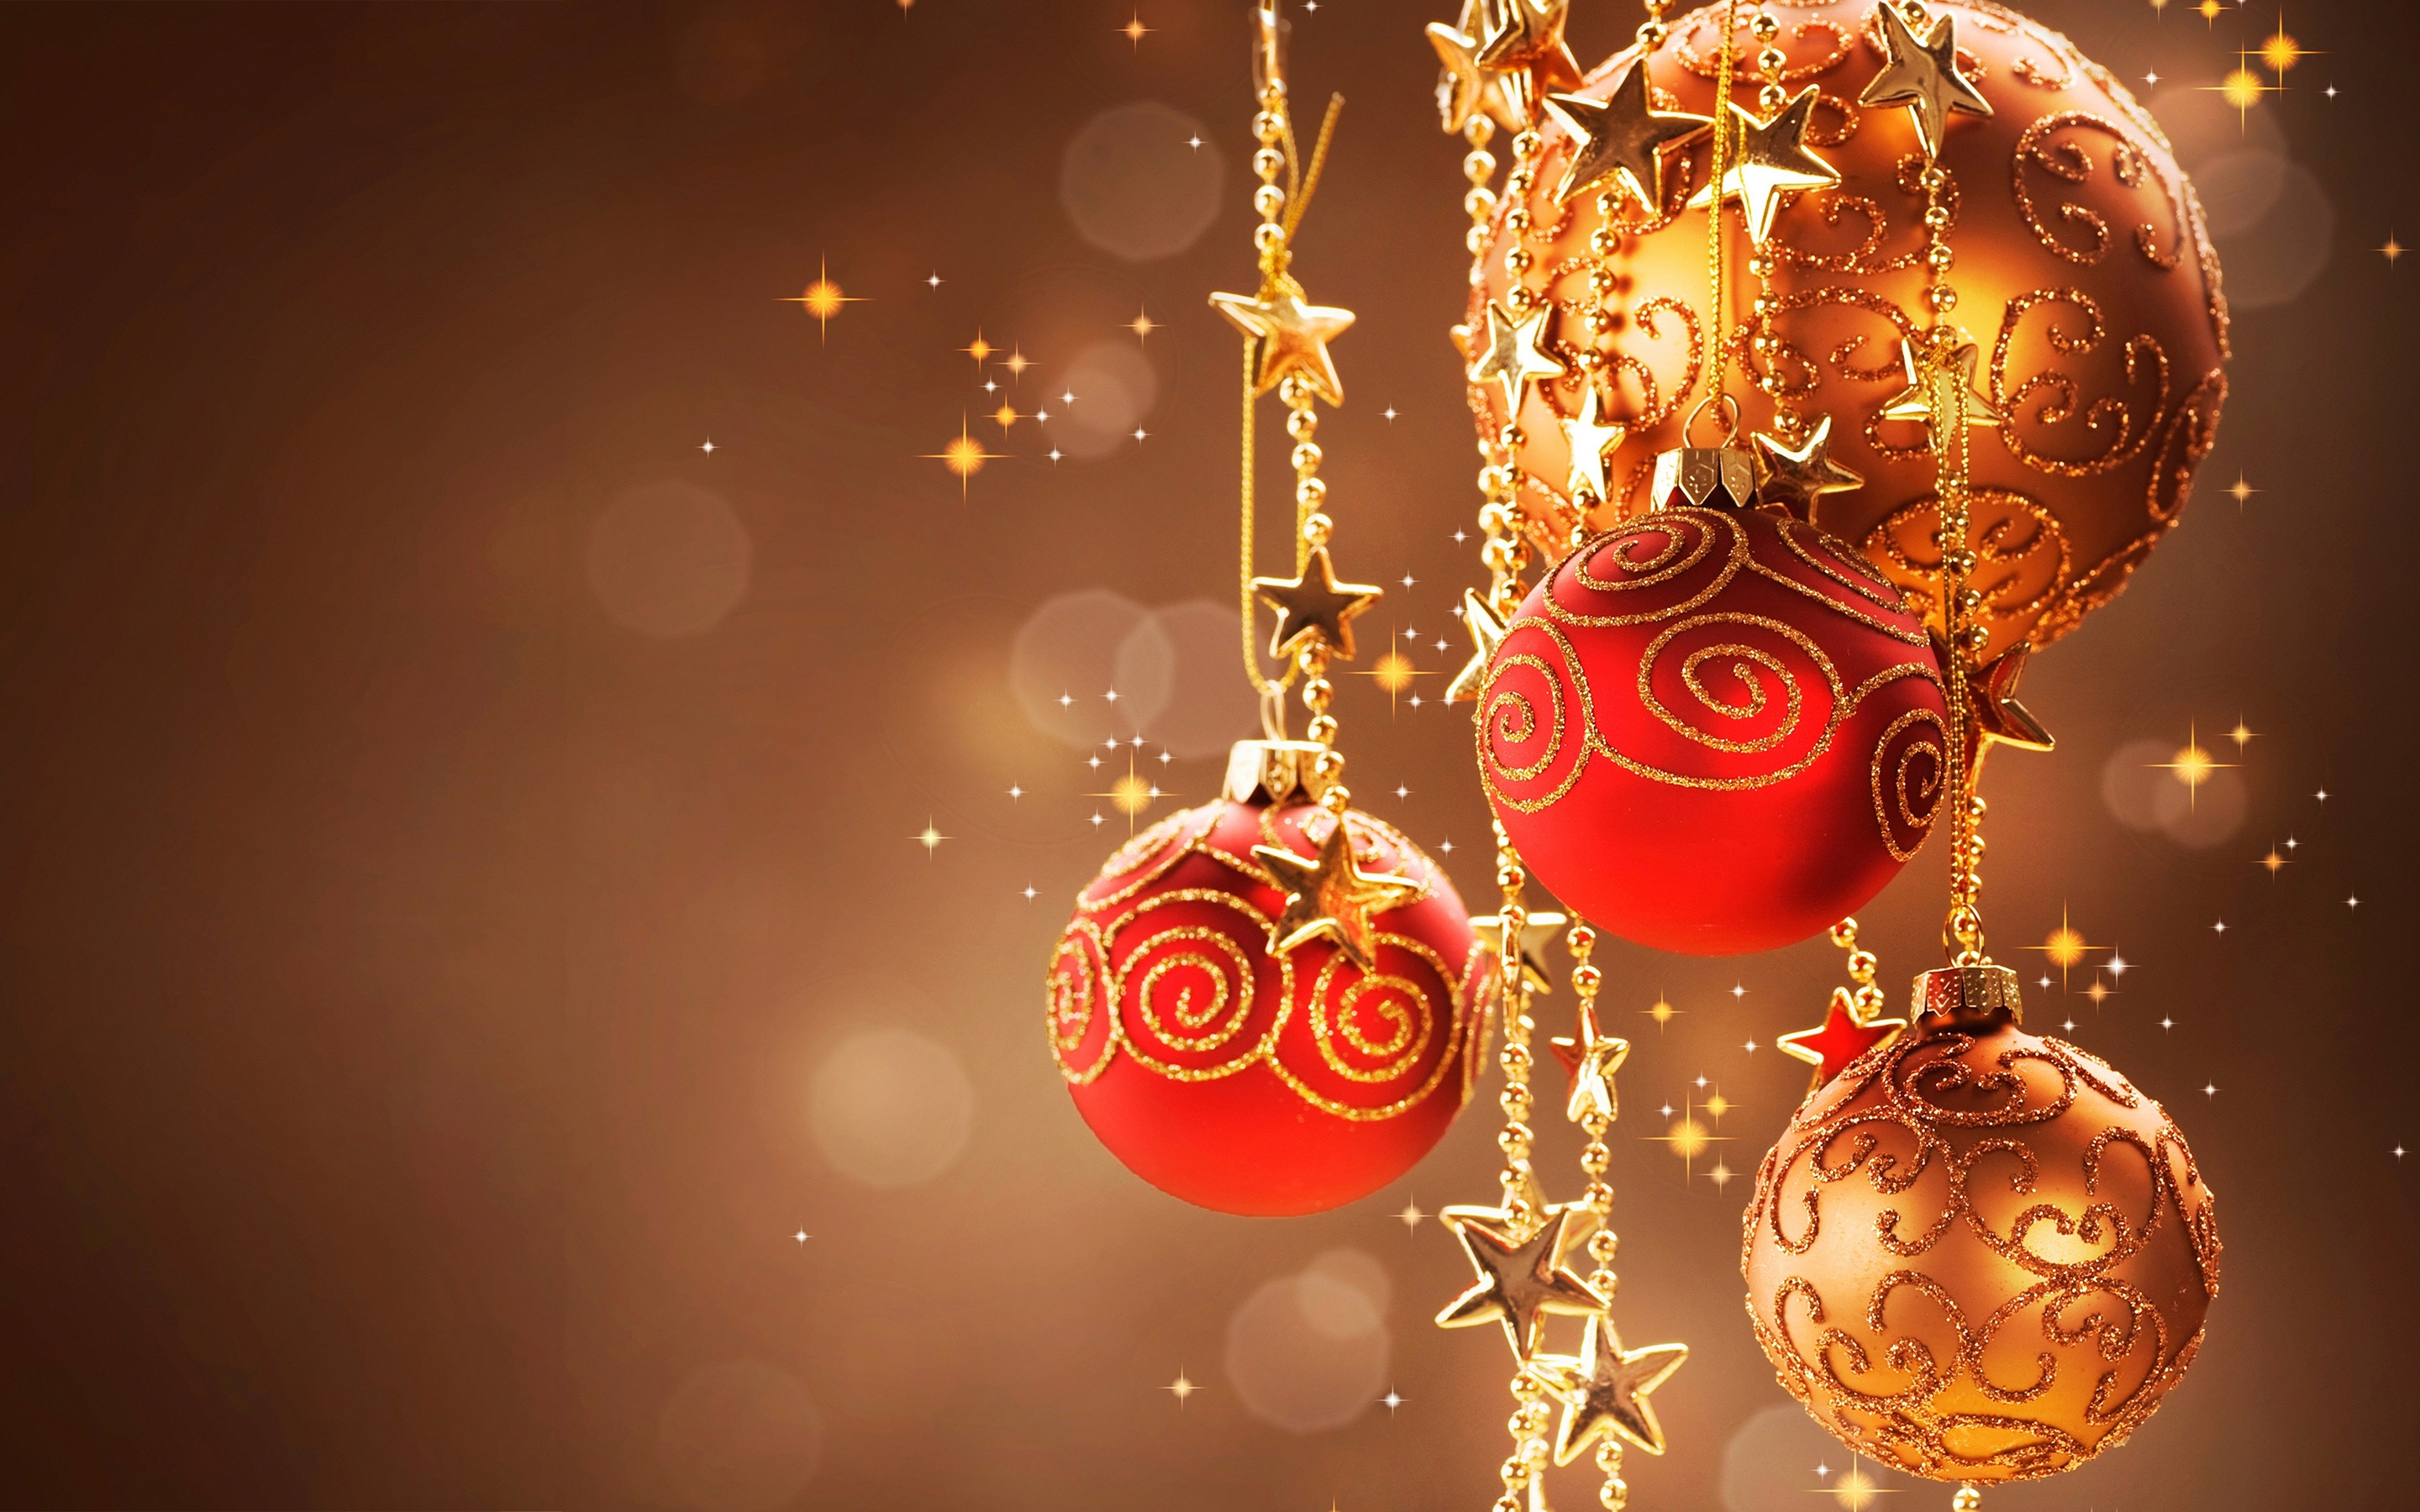 2880x1800 Free download 25 Super HD Christmas Wallpapers [] for your Desktop, Mobile \u0026 Tablet | Explore 62+ Xmas Wallpapers | Christmas Wallpapers For Desktop, Windows 7 Xmas Wallpaper, Free Xmas Wallpaper Desktop Themes